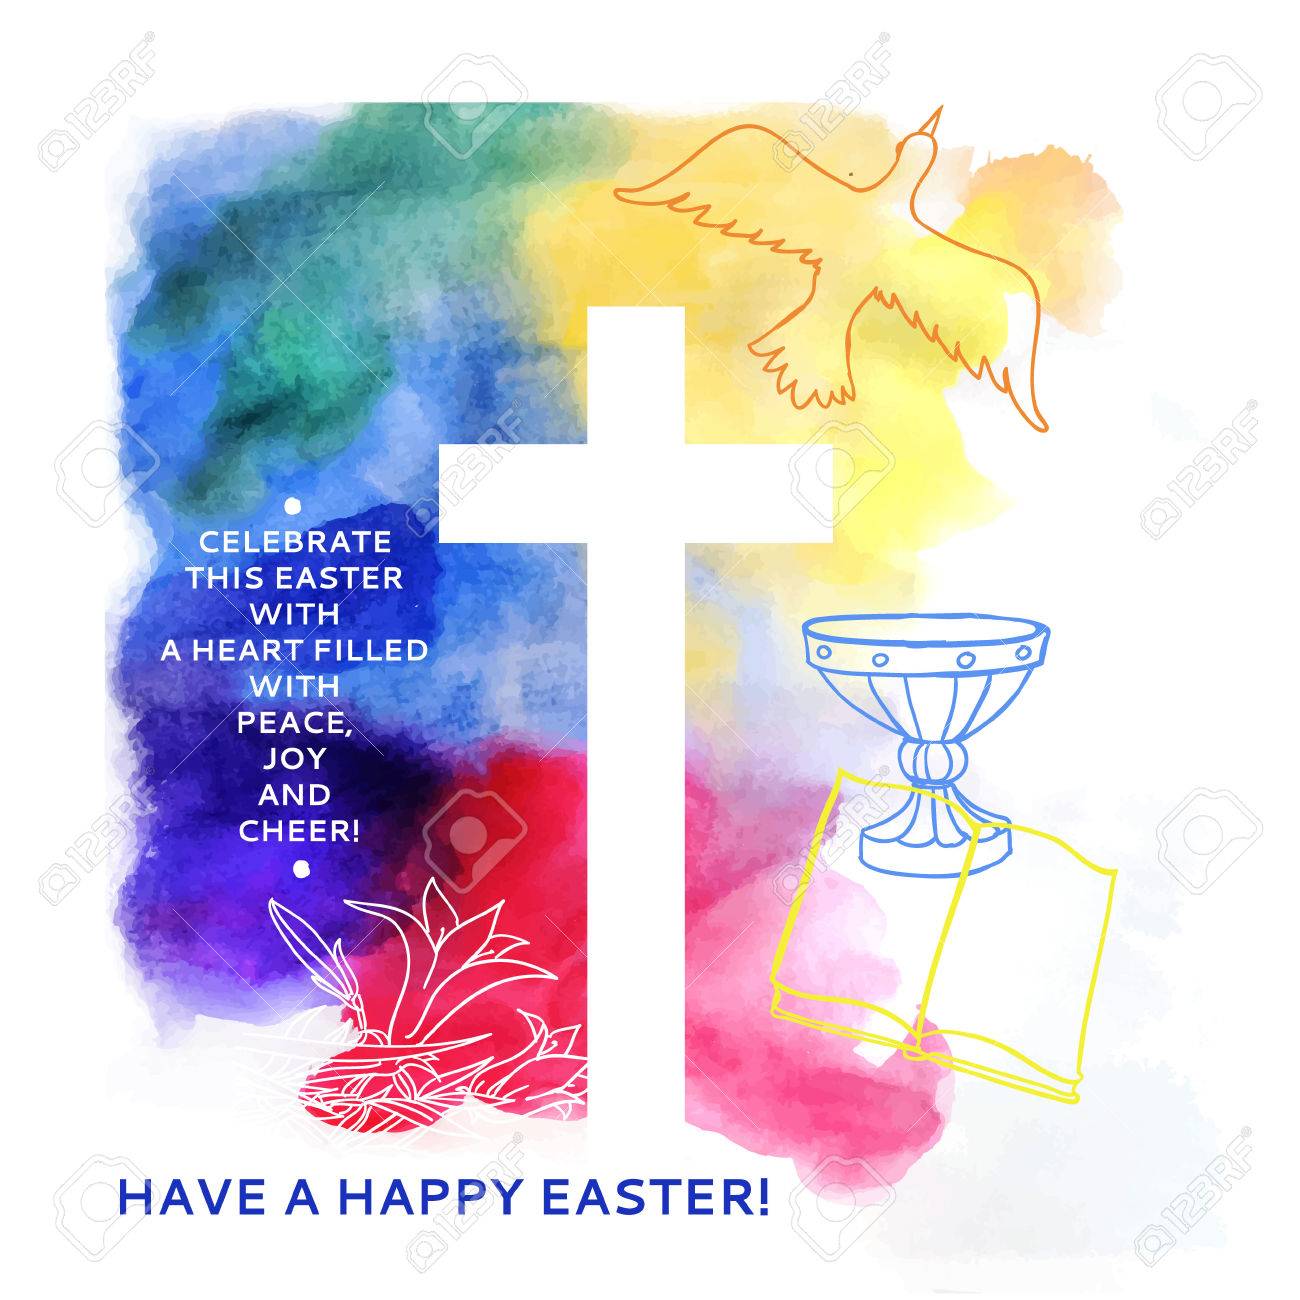 Colorful Abstract Background Includes Happy Easter Words Royalty